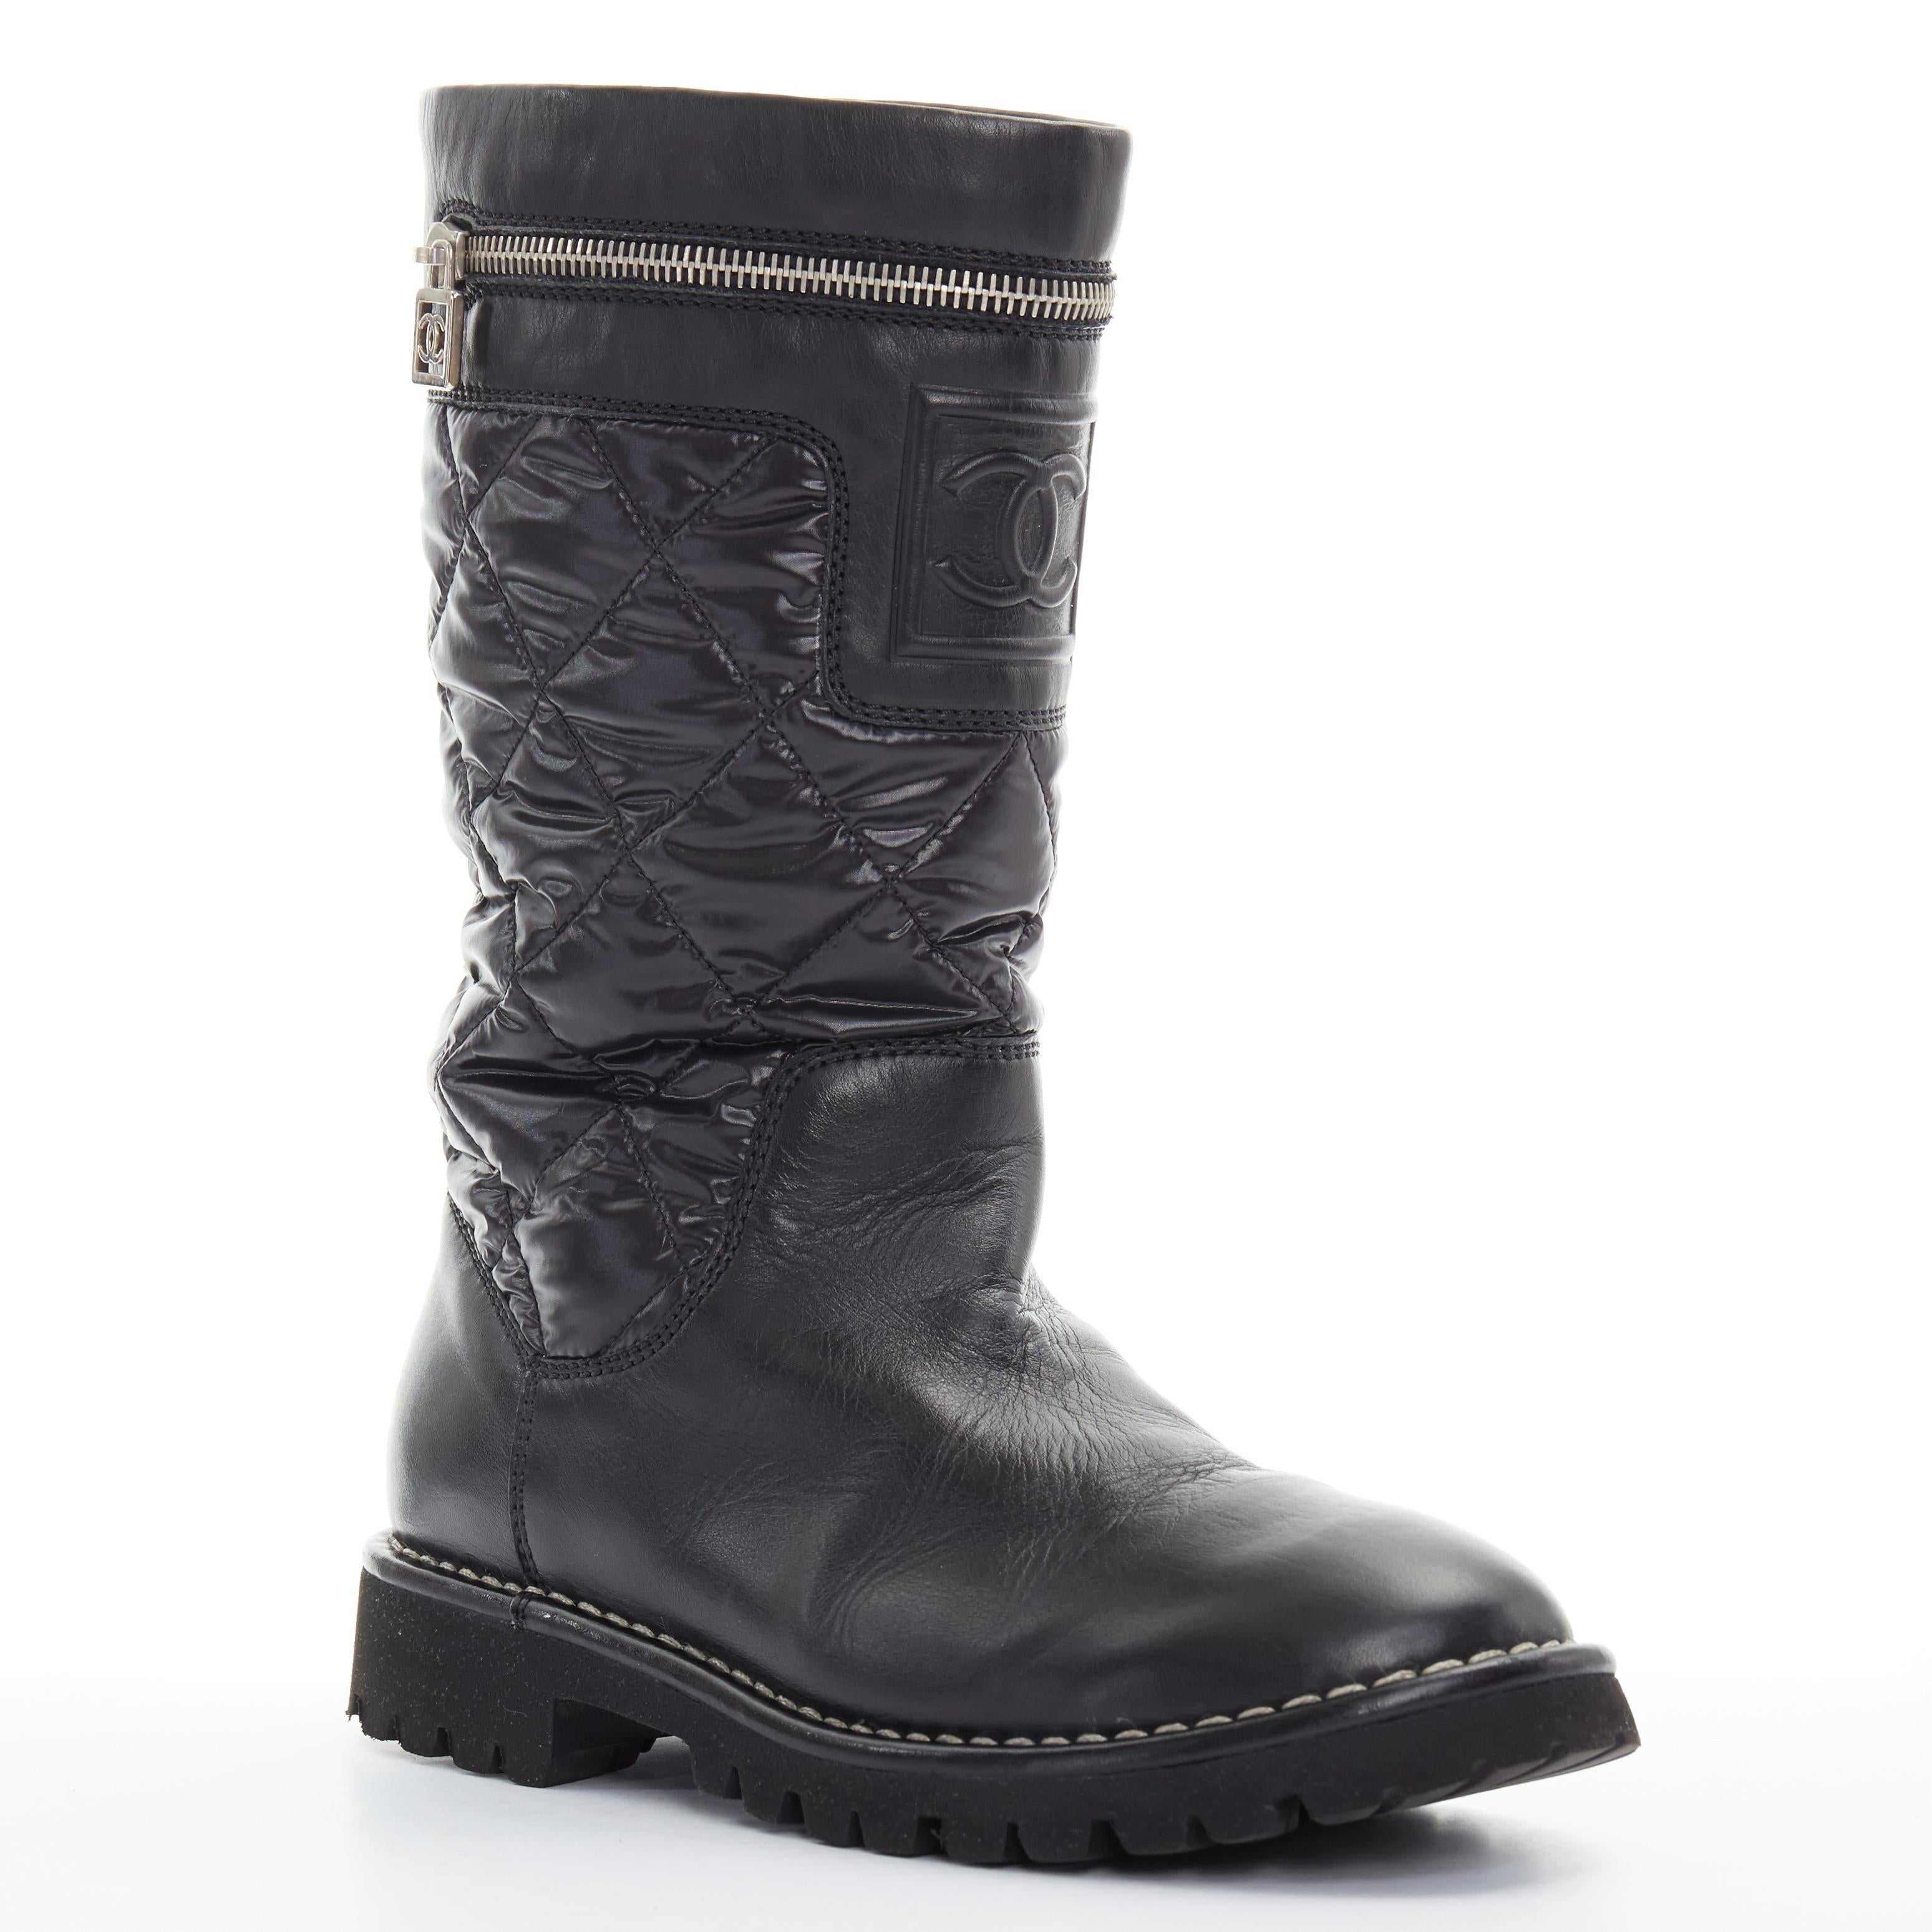 CHANEL Sports black diamond quilted nylon CC zip detail round toe calf boot EU36
Brand: Chanel
Designer: Karl Lagerfeld
Model Name / Style: Sport boot
Material: Leather
Color: Black
Pattern: Solid
Closure: Pull on
Extra Detail: Low (1-1.9 in) heel